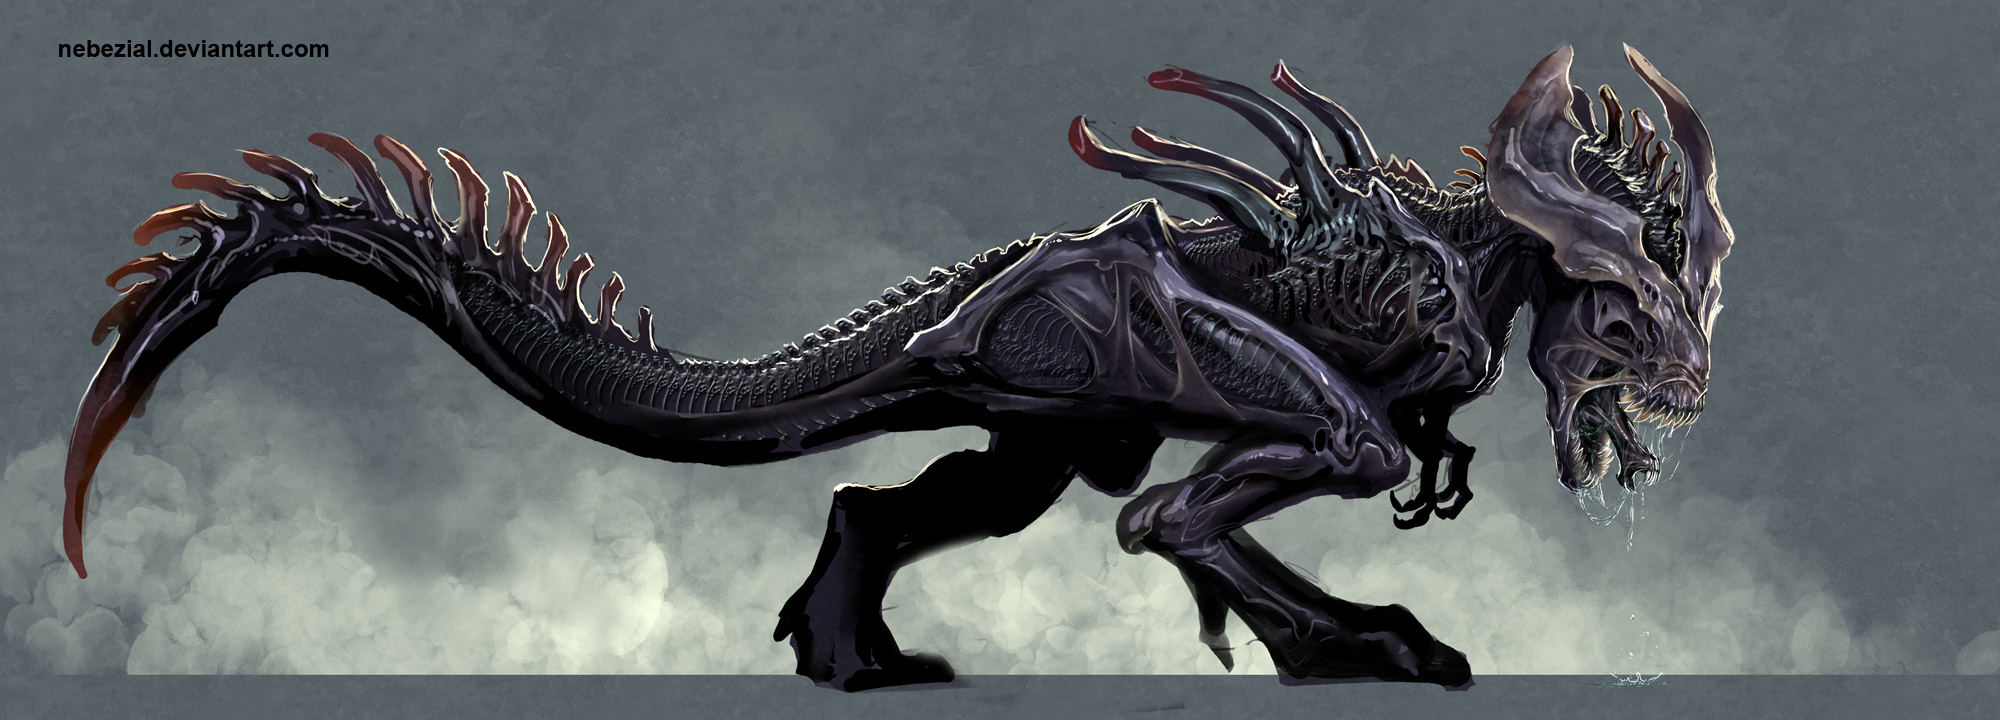 this-xenomorph-t-rex-is-much-more-terrifying-than-the-indominus-rex1